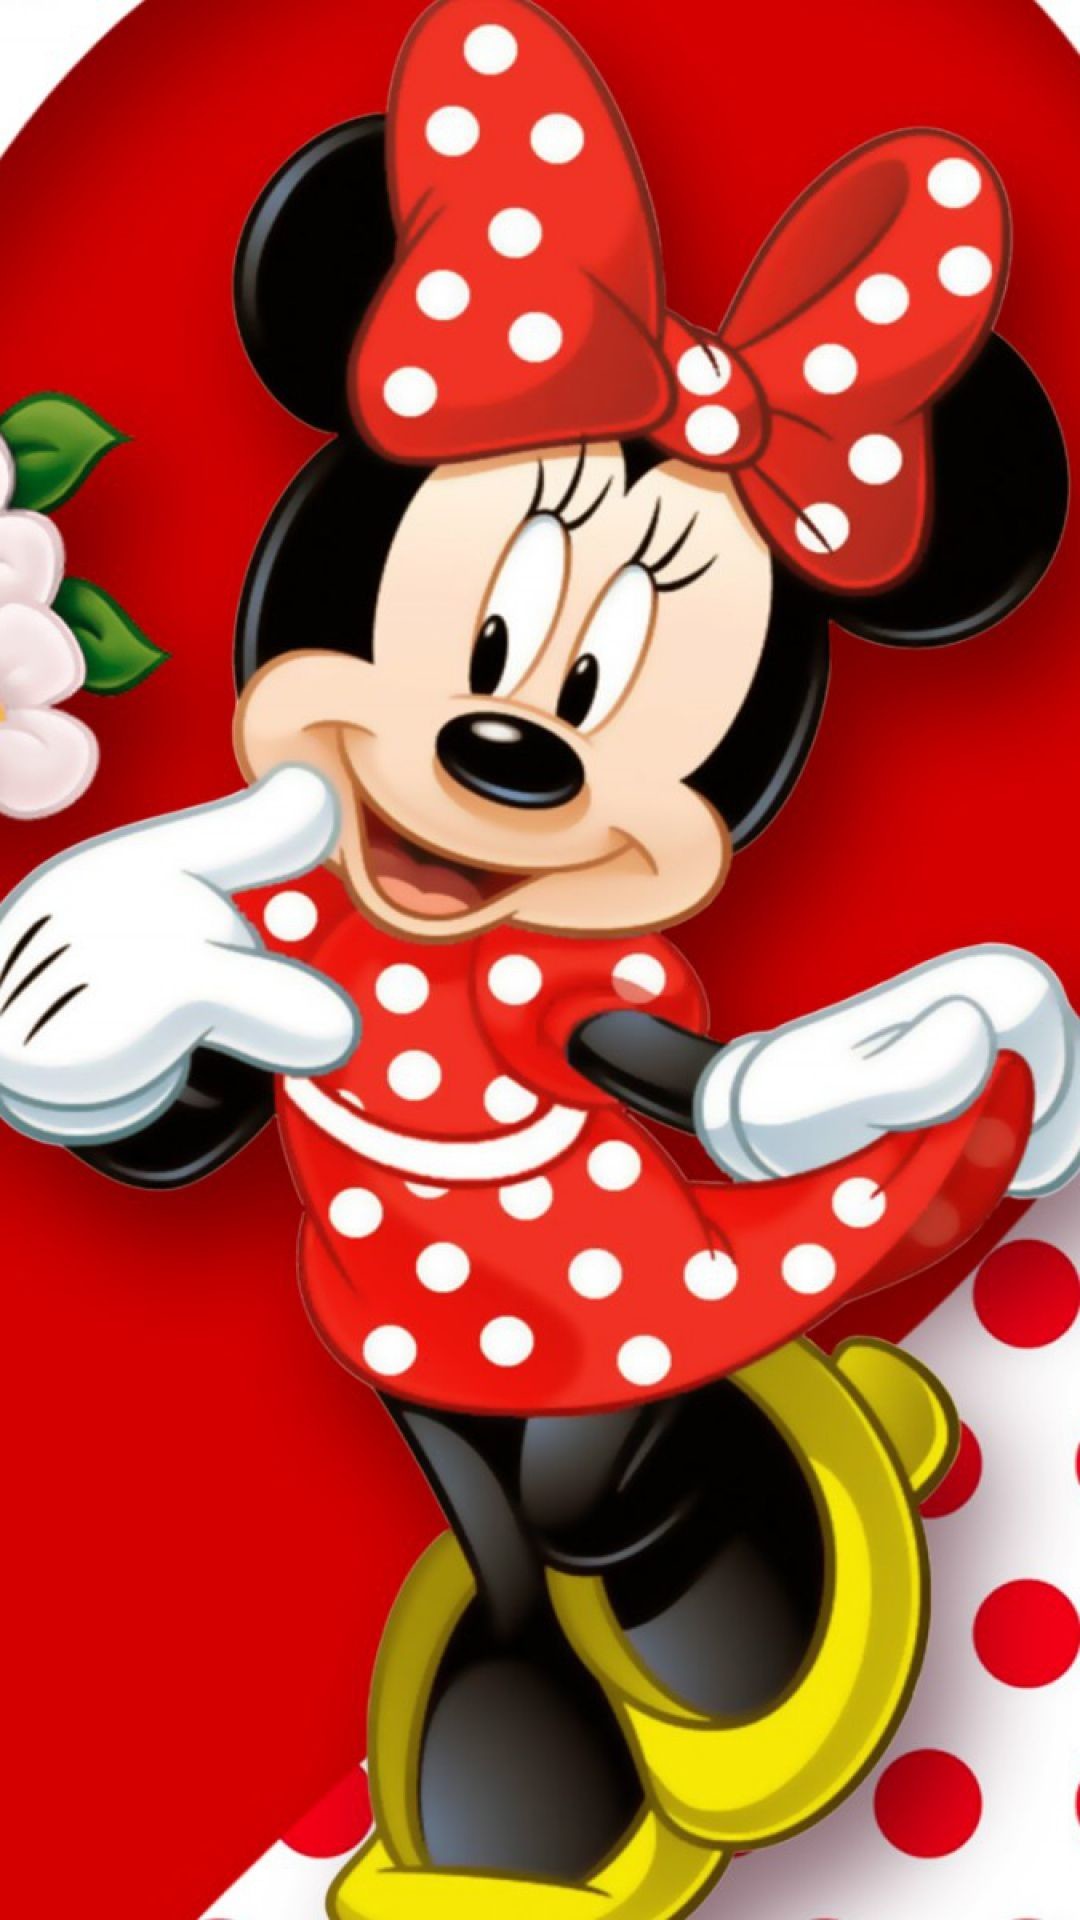 1080x1920 Download Wallpaper  Minnie mouse, Mickey mouse, Mouse ... -  Wallpaper Zone